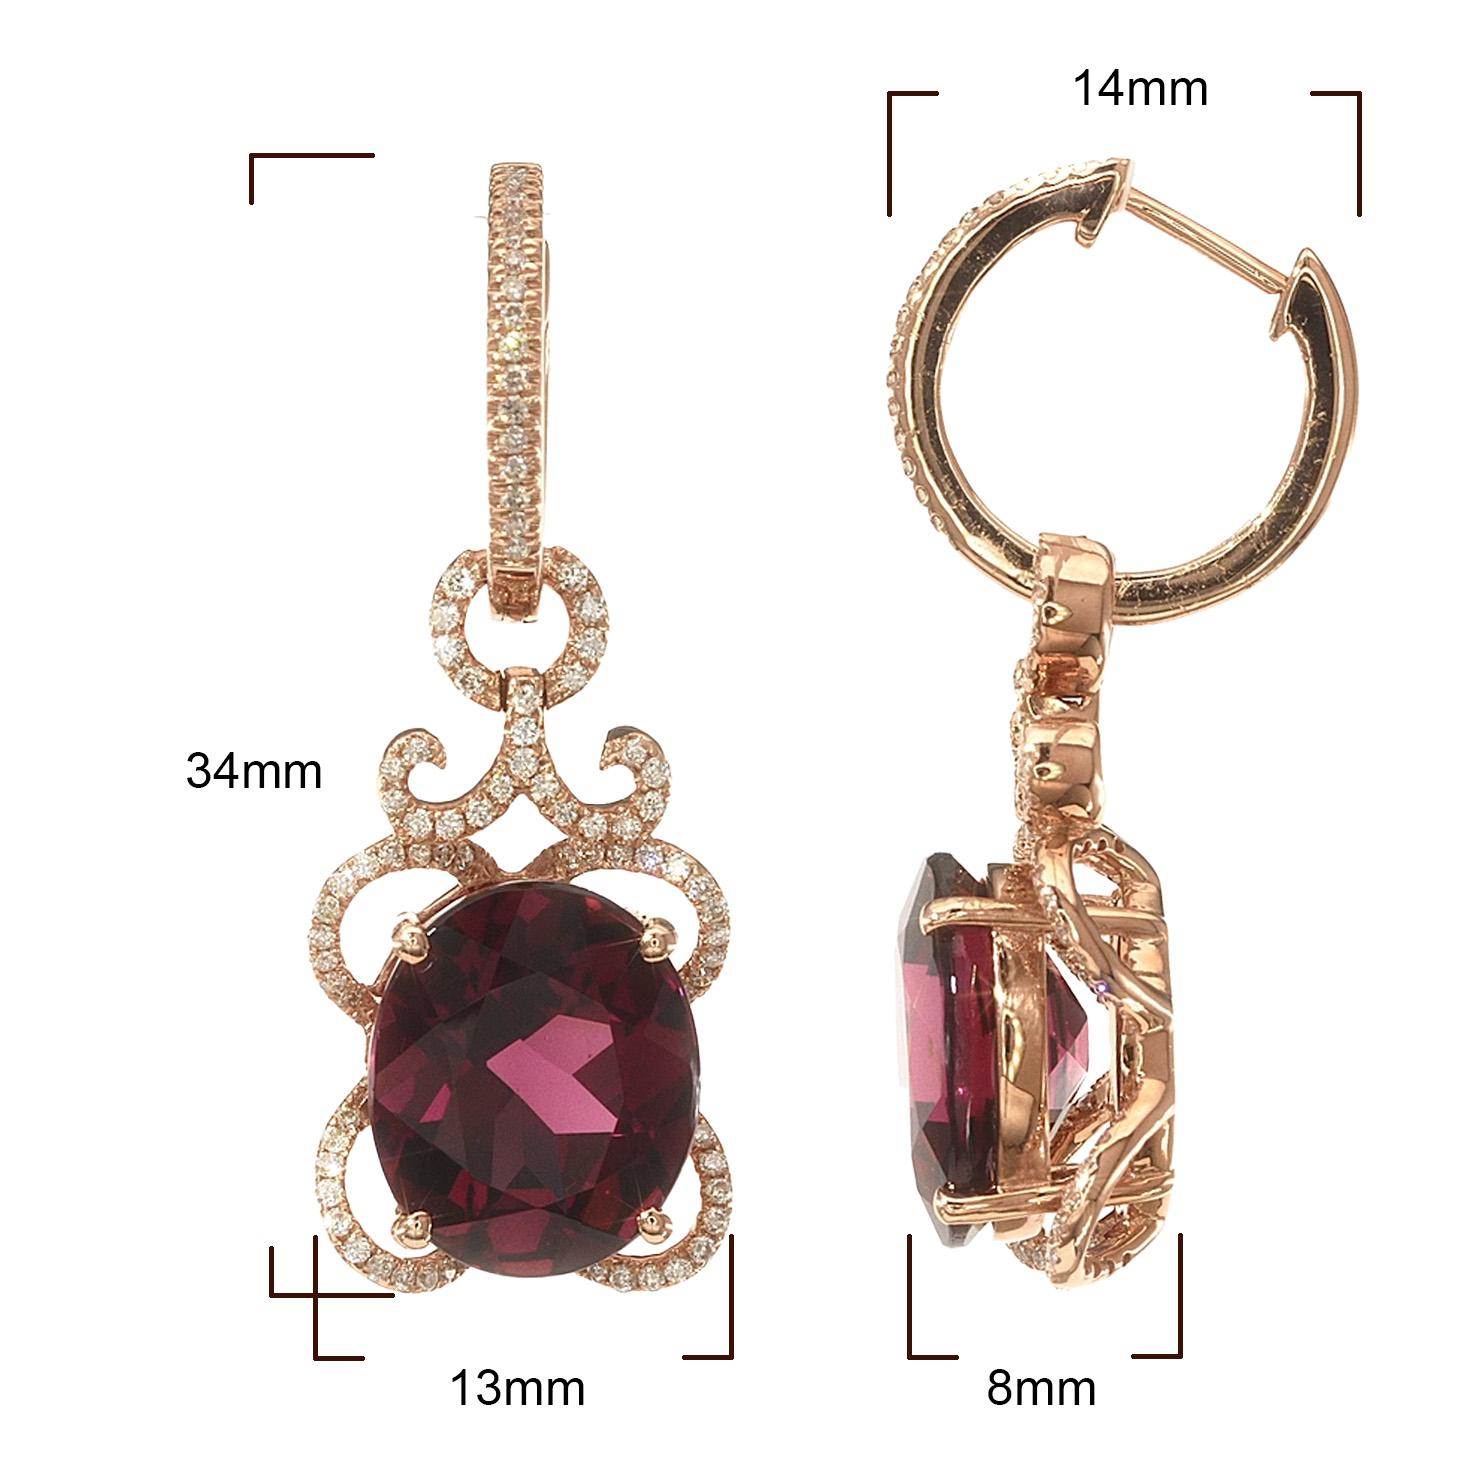  Natural Rhodolite Garnet 10.27 Carat in Rose Gold Earrings with Diamonds For Sale 1